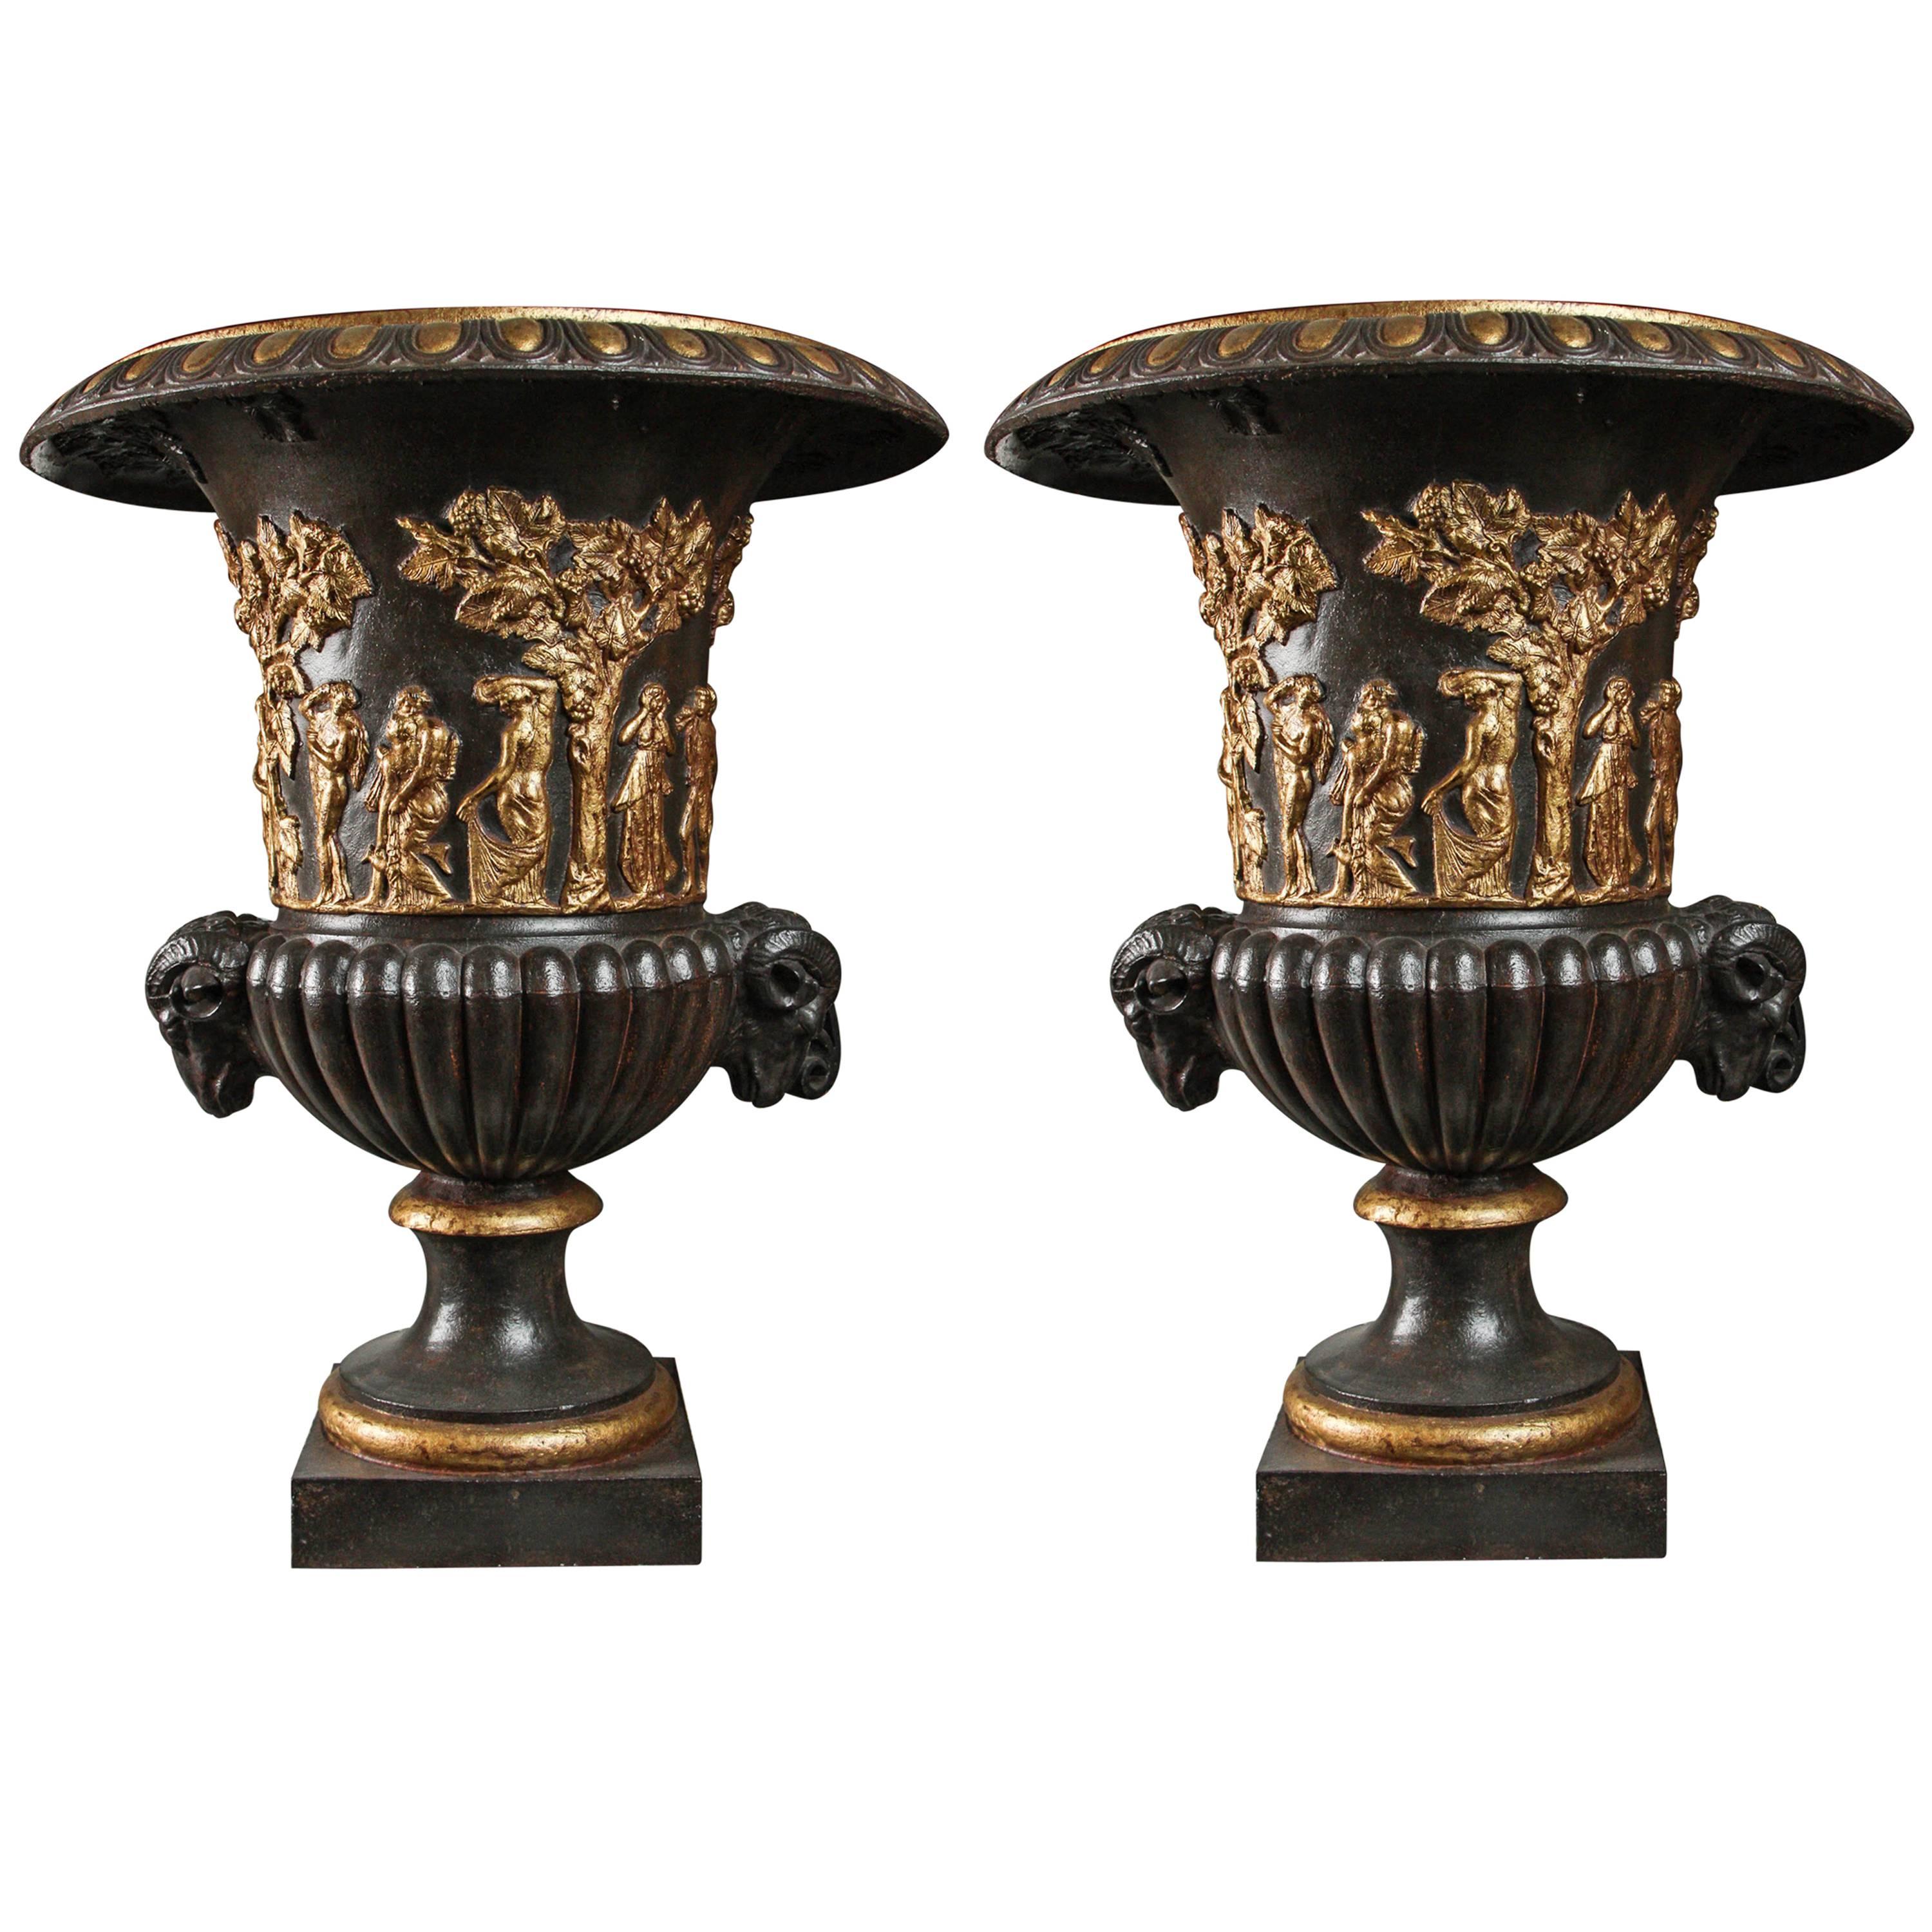 Pair of Early 19th Century French Empire Campaign Urns For Sale